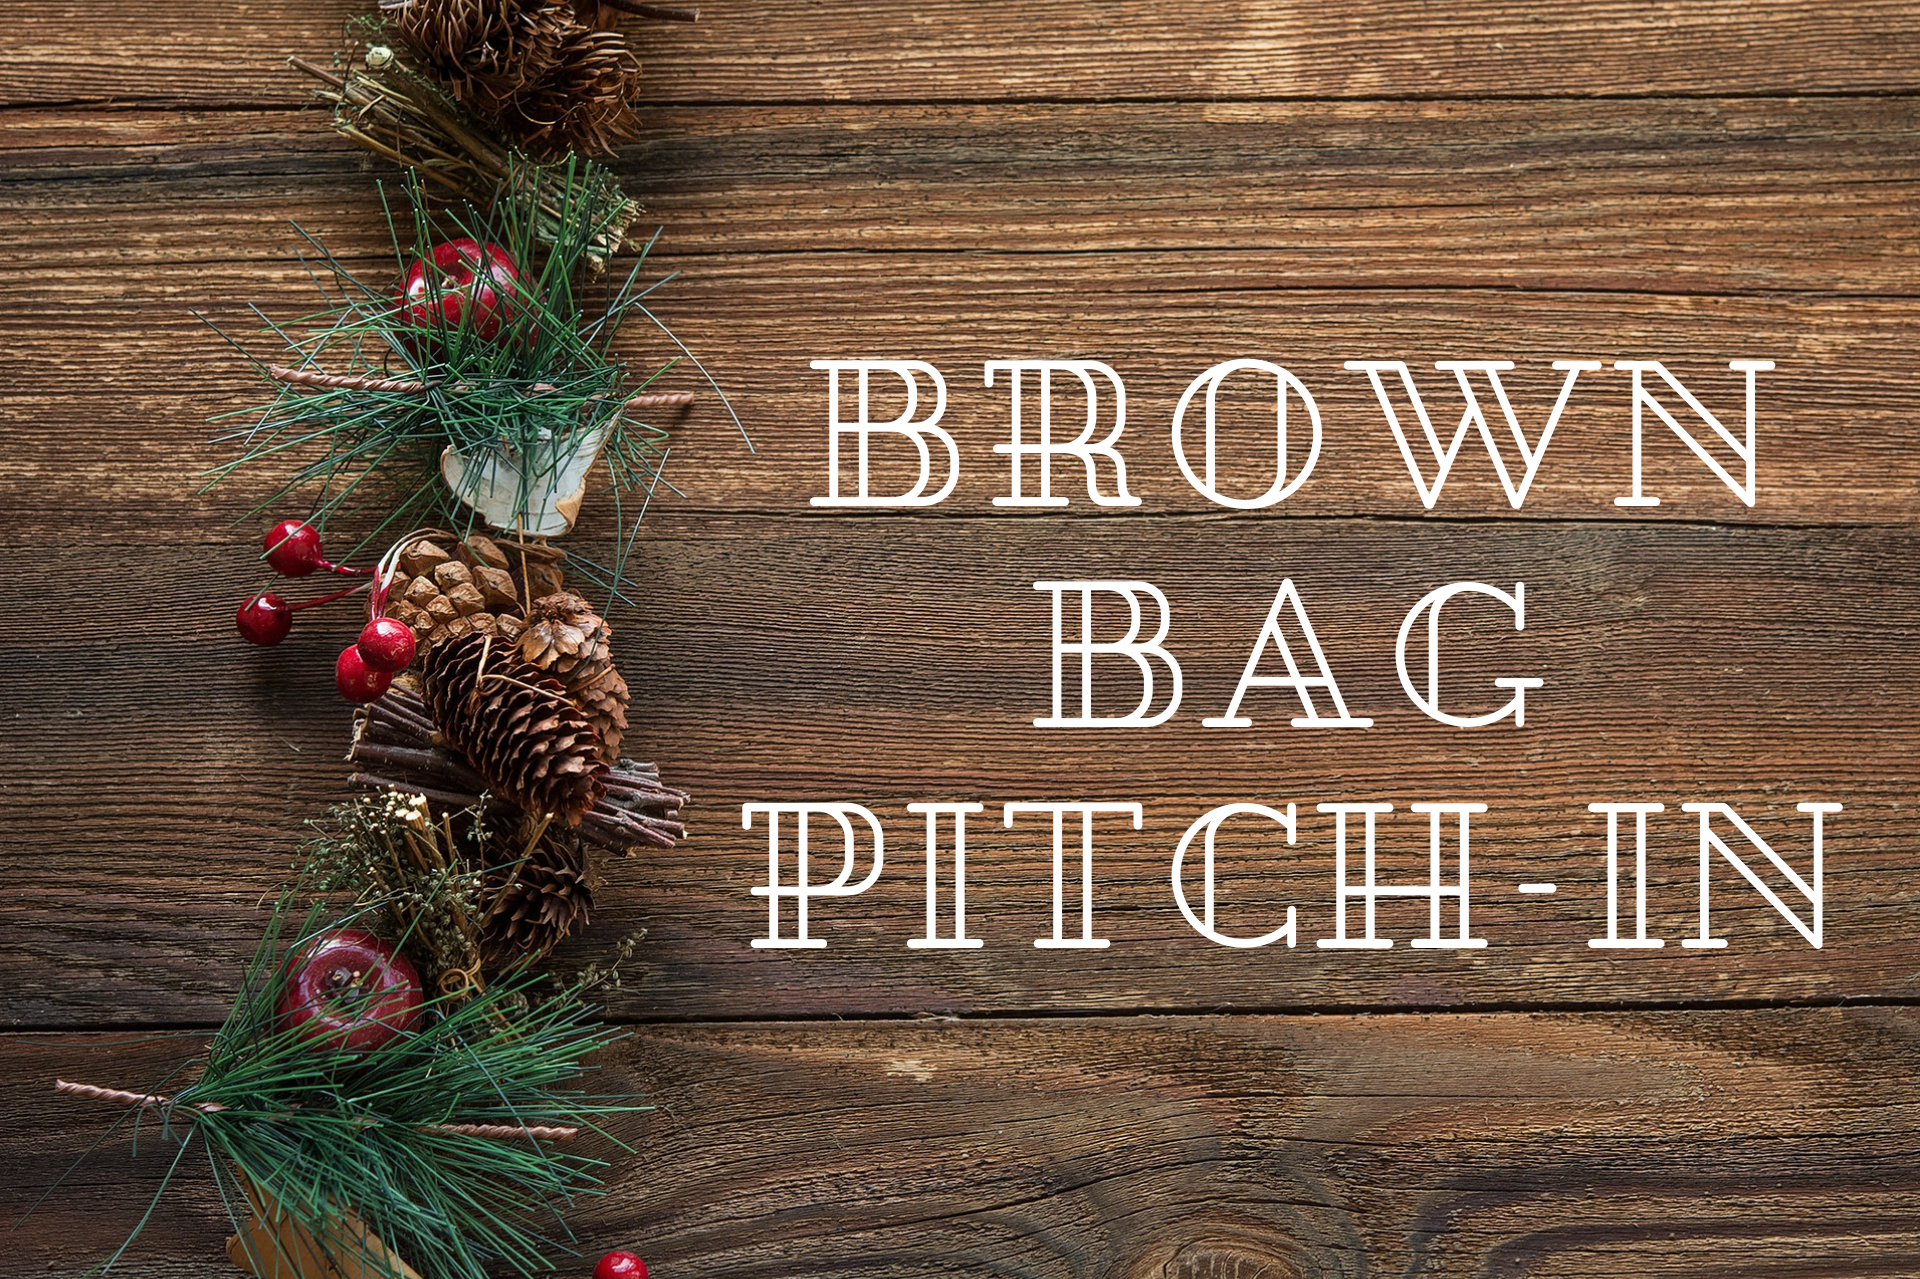 Brown Bag Pitch In